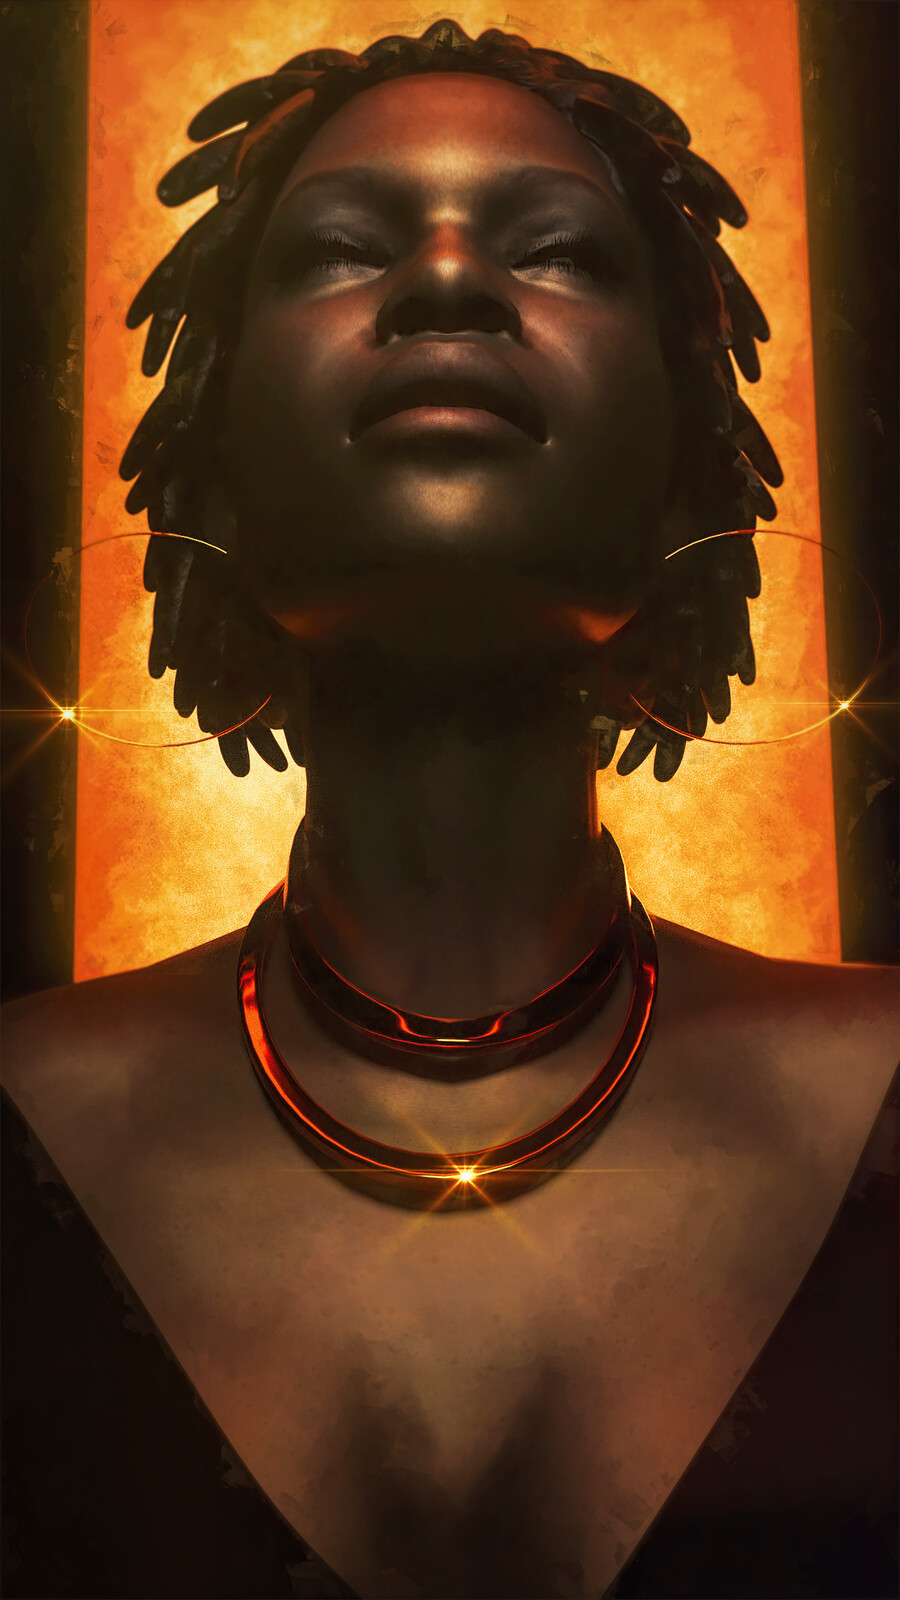 Title: Genesis 
Description: A woman with golden earrings and necklaces facing upwards